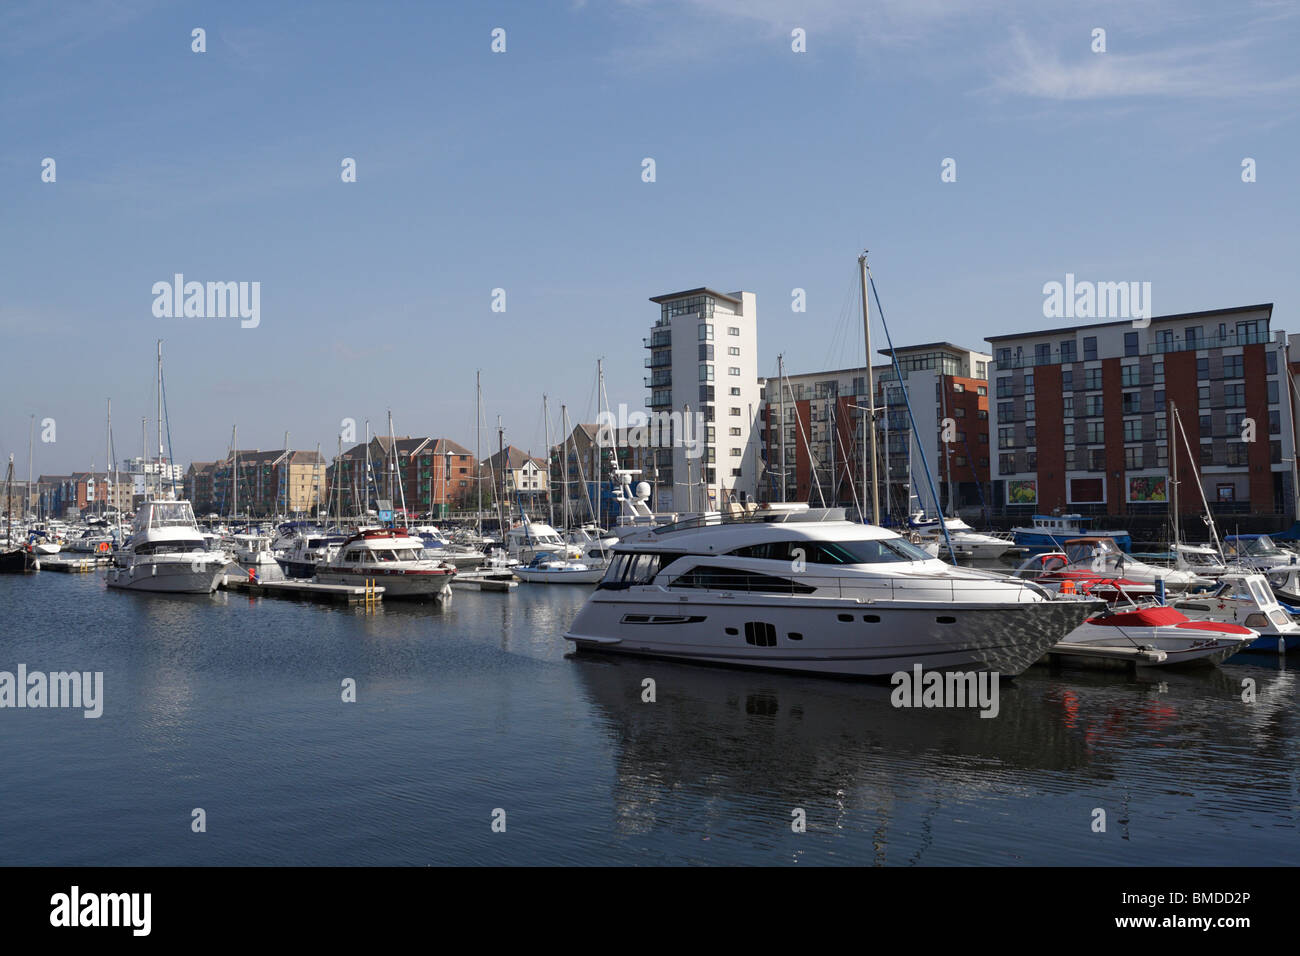 The expanse of Swansea marina in the old town dock, Wales UK Stock Photo